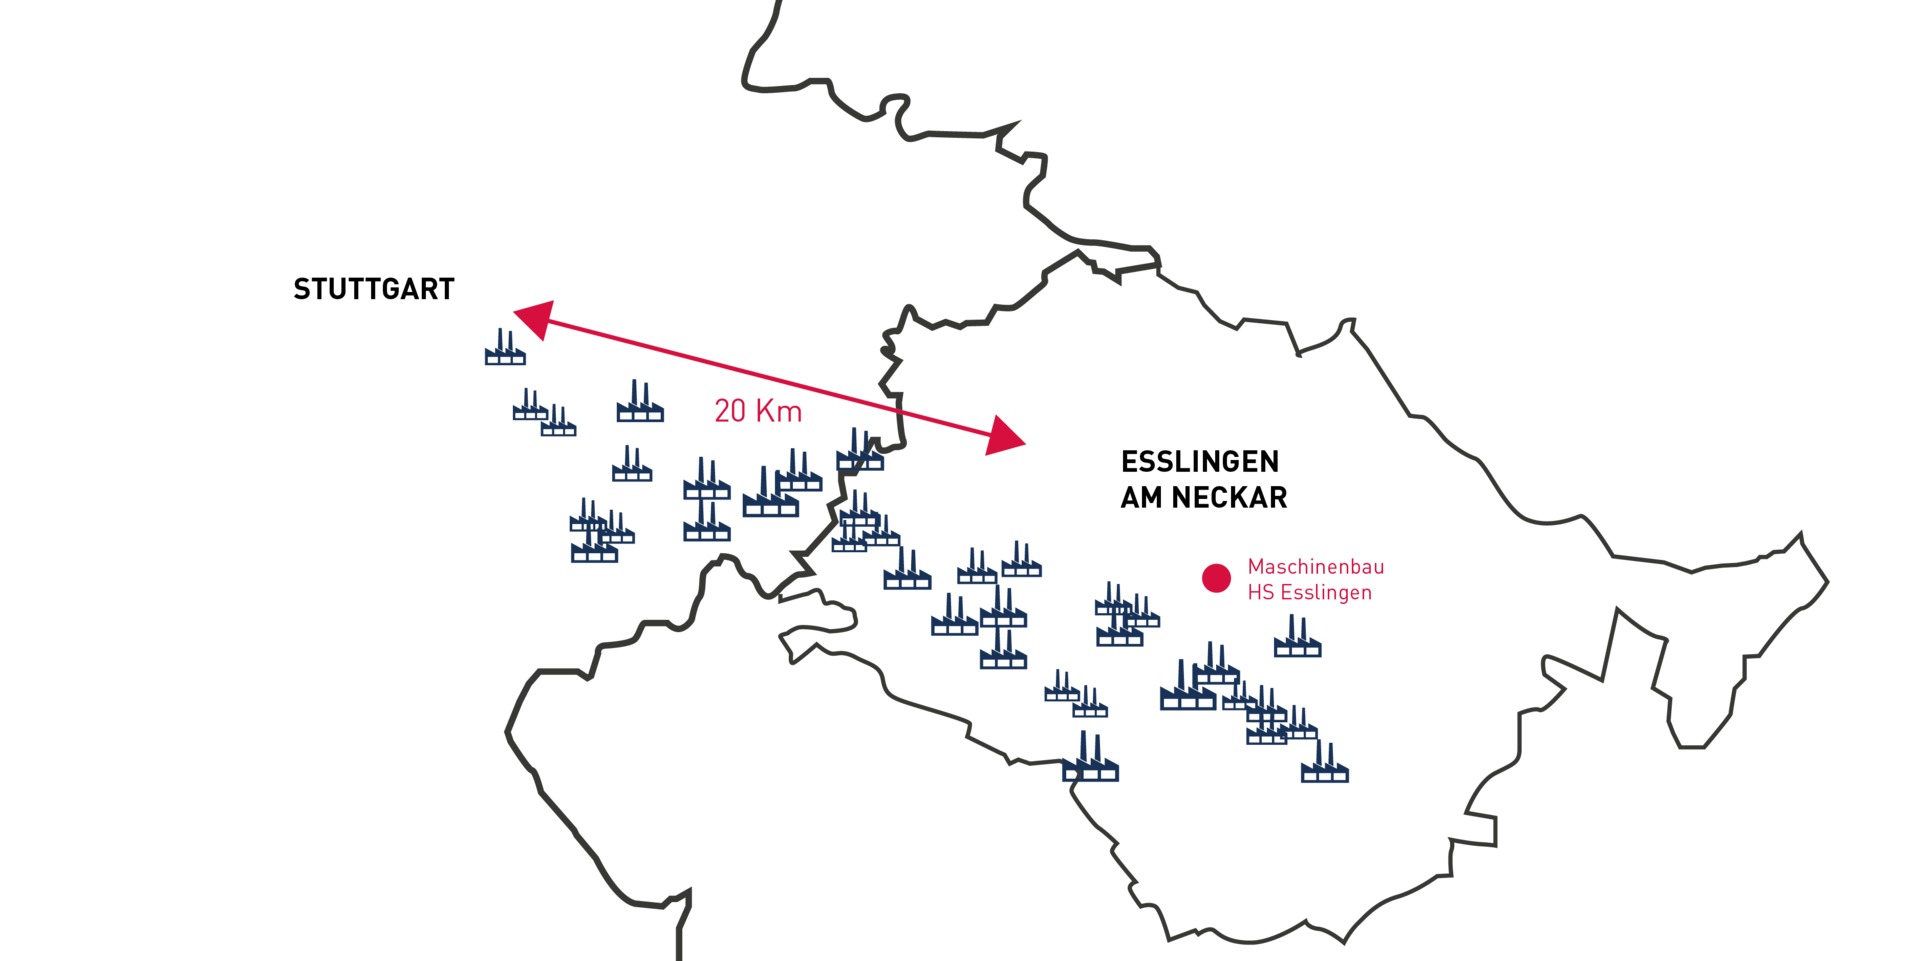 The graphic shows the distance of 20 km from Stuttgart to Esslingen.